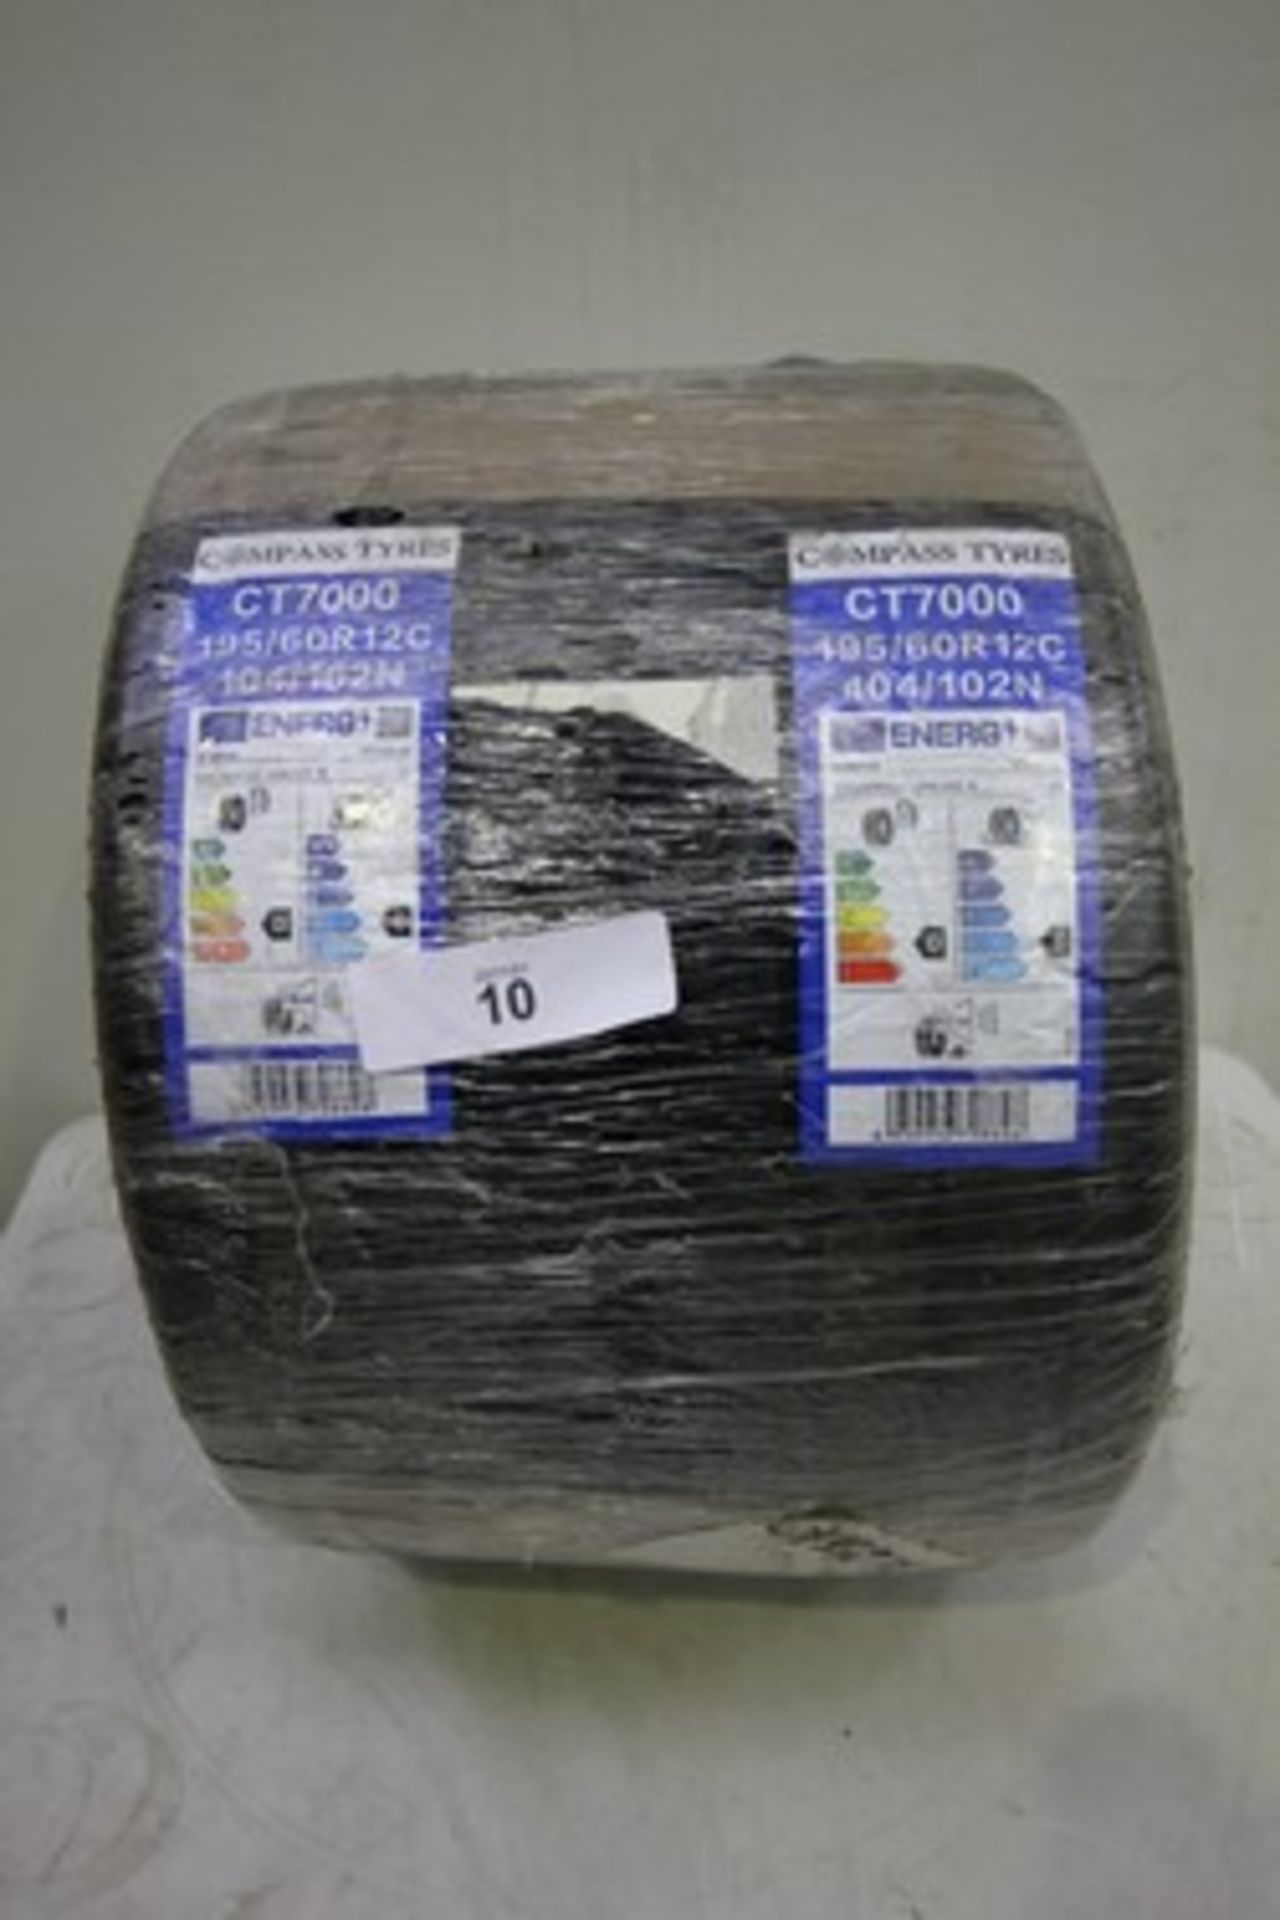 2 x Compass CT7000 tyres, size 195/60R12C 104/102N - new with labels (GS2)